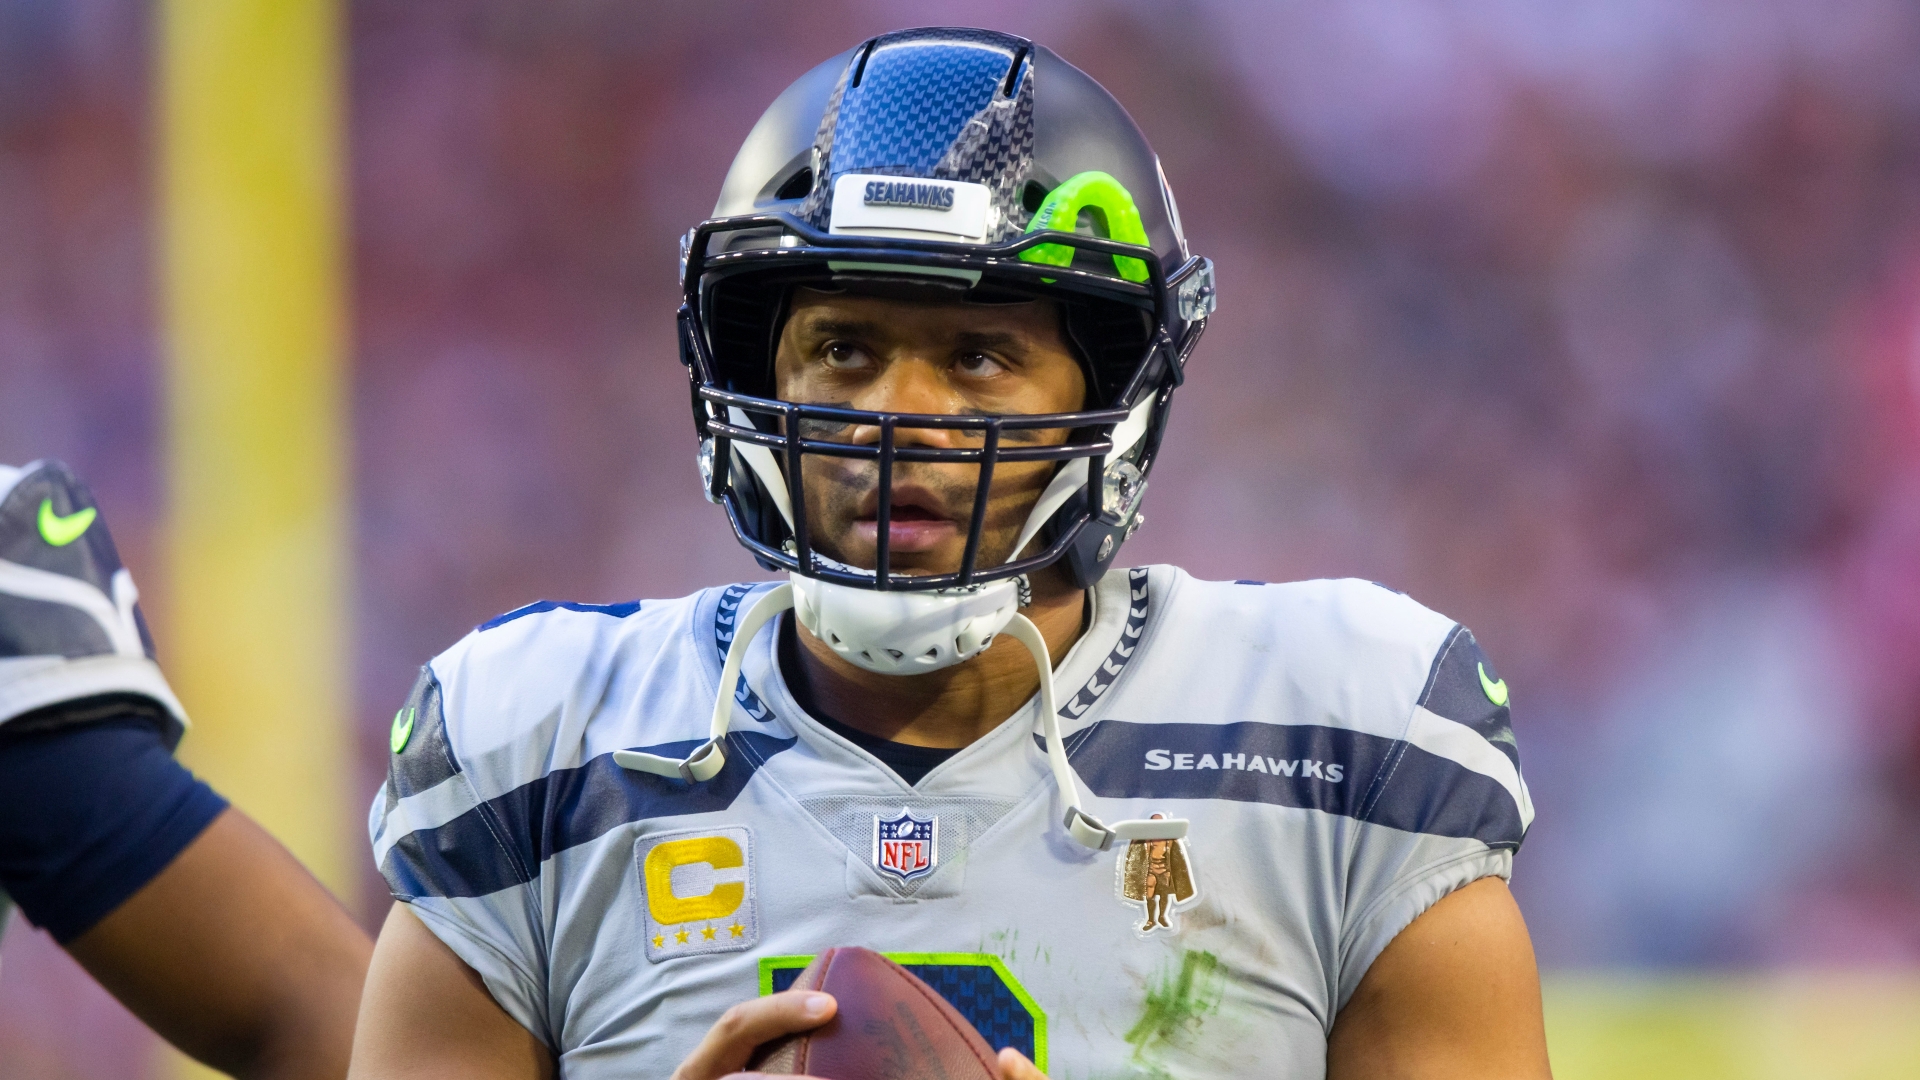 How do you feel about the Russell Wilson trade, one year later? : r/Seahawks